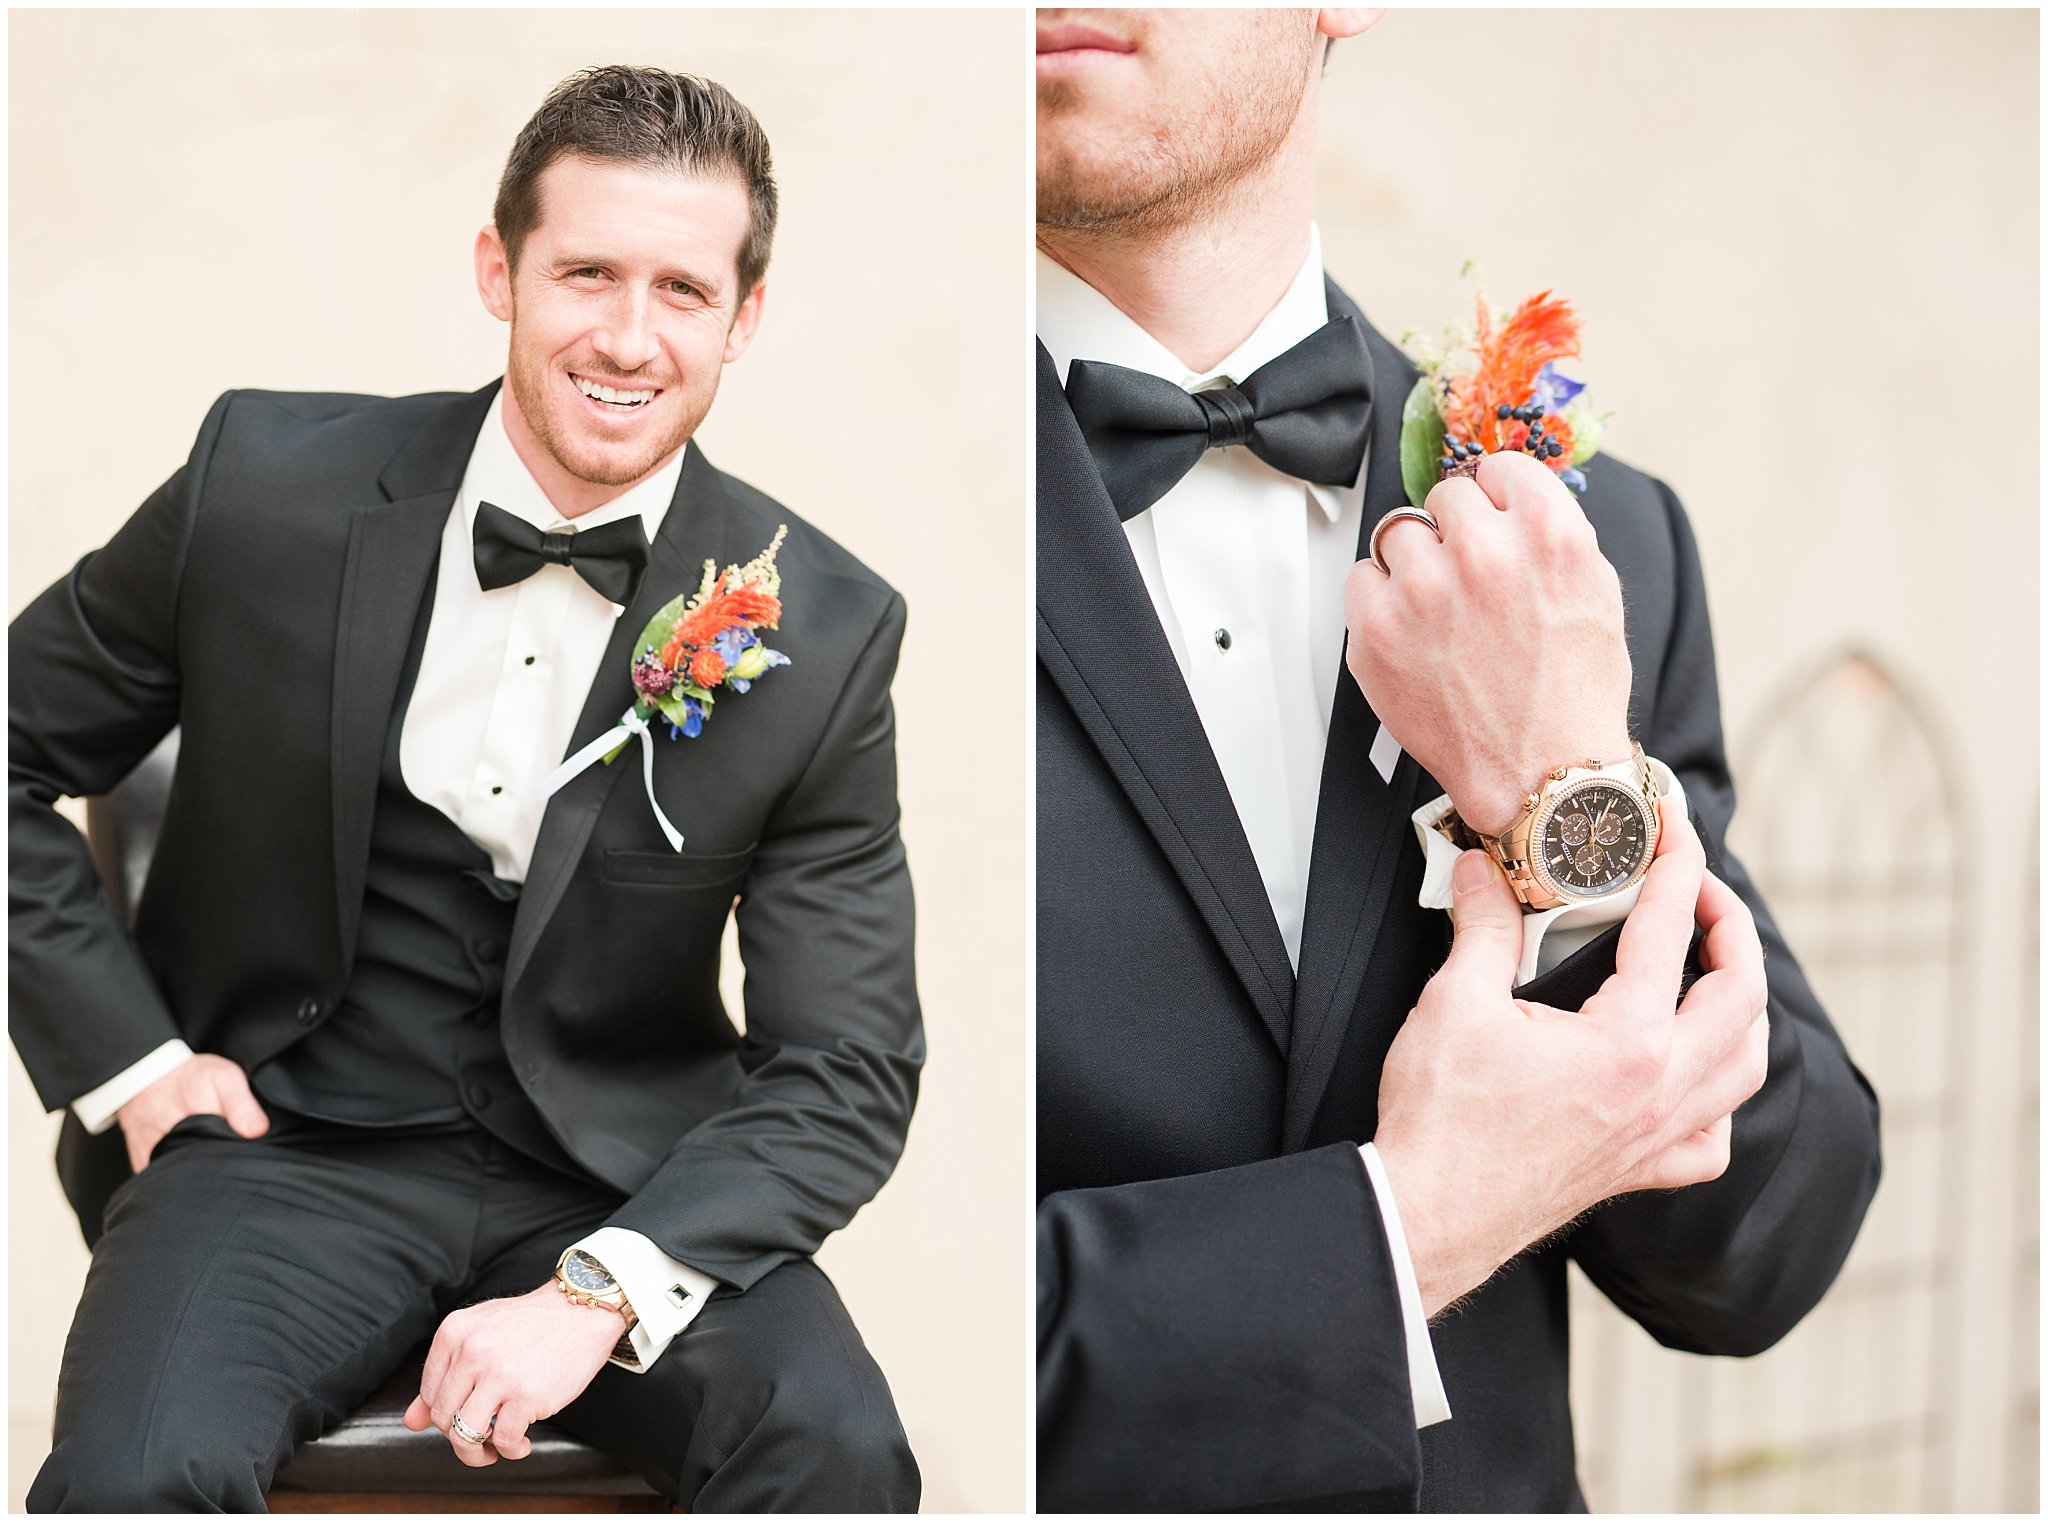 Groom in black tie and suit for portraits before wedding at Oak Hills Reception and Event Center | Top Utah Wedding and Couples Photos 2019 | Jessie and Dallin Photography